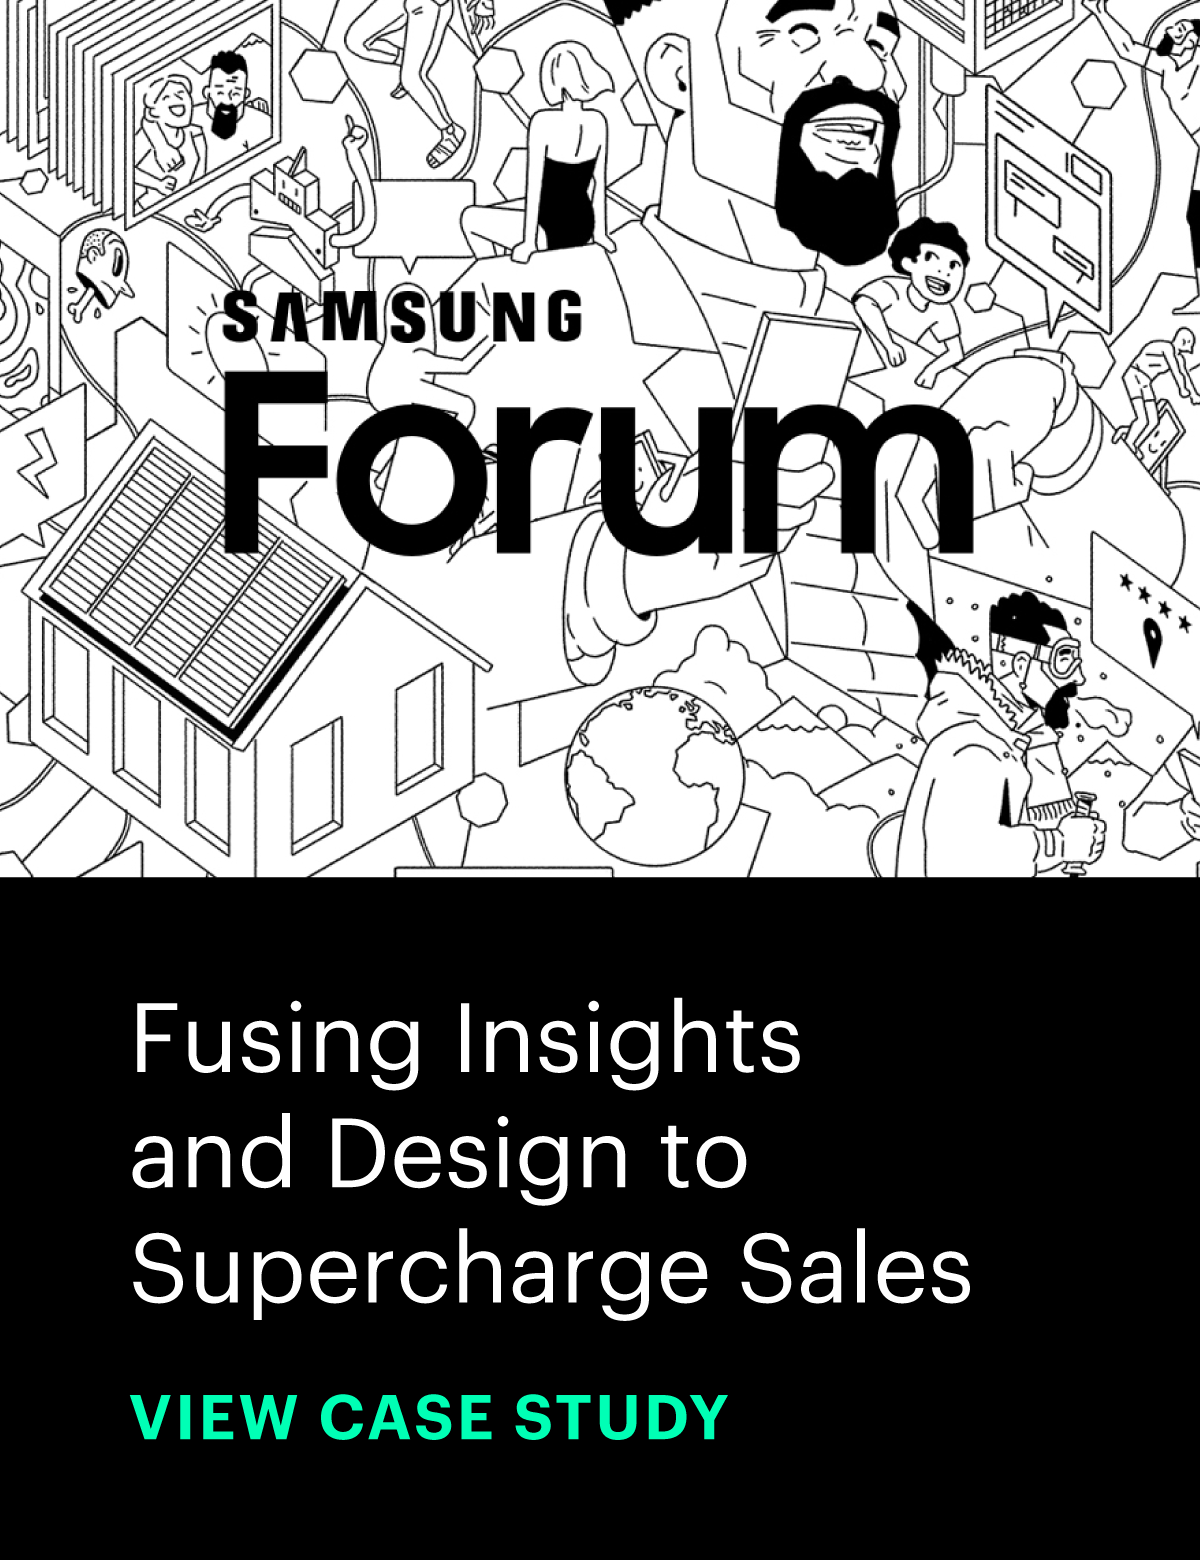 Samsung: Fusing insights and design to supercharge sales